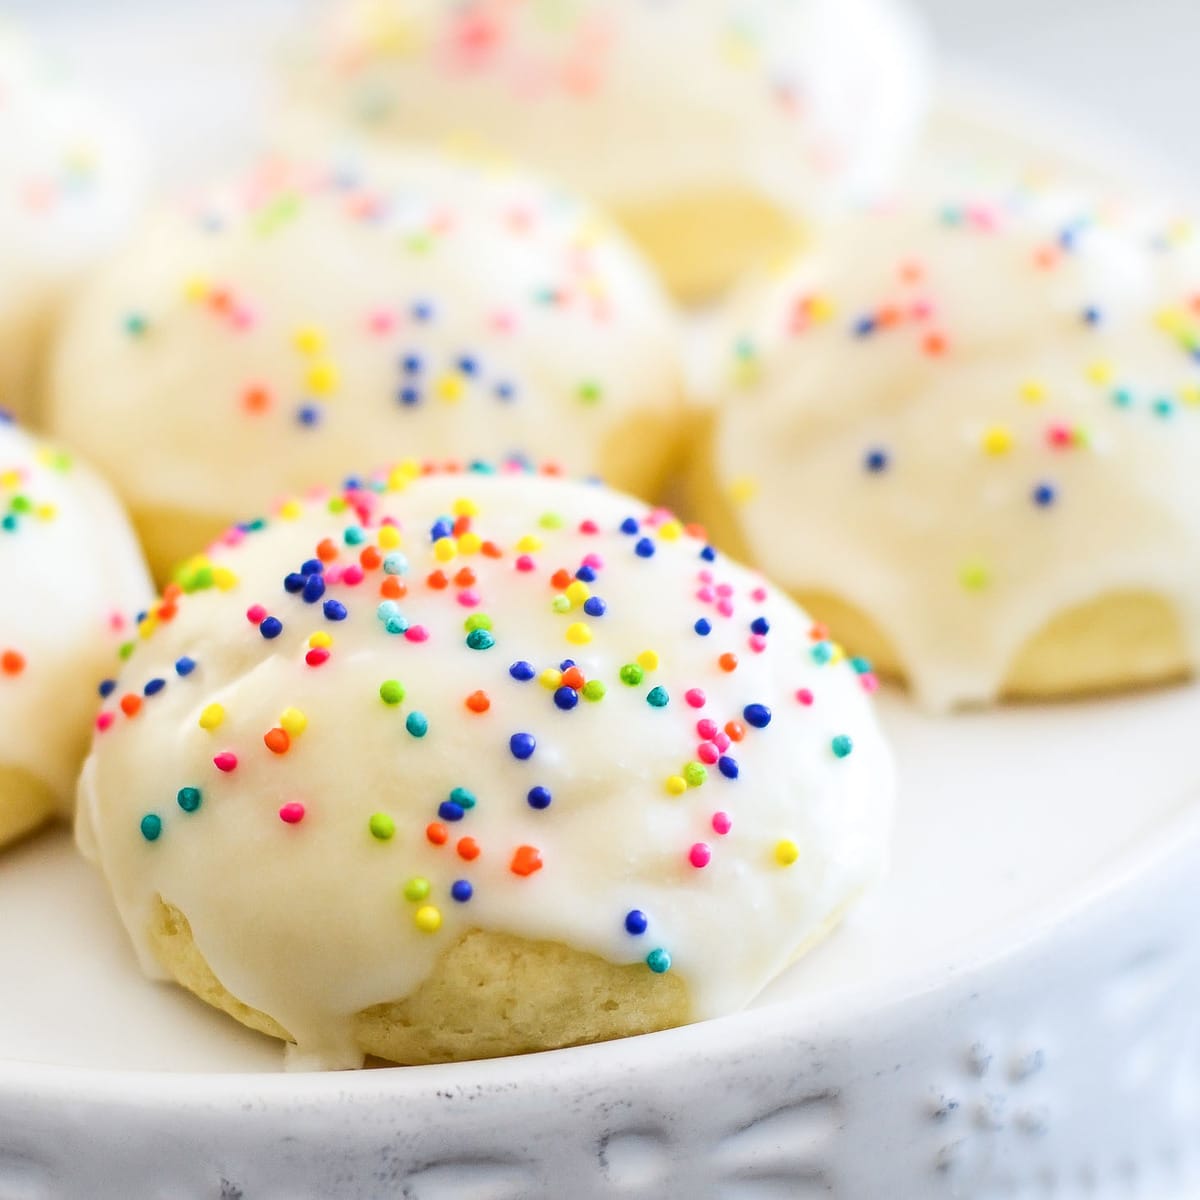 Italian Anise Cookies dipped in glaze and covered in sprinkles on a white plate